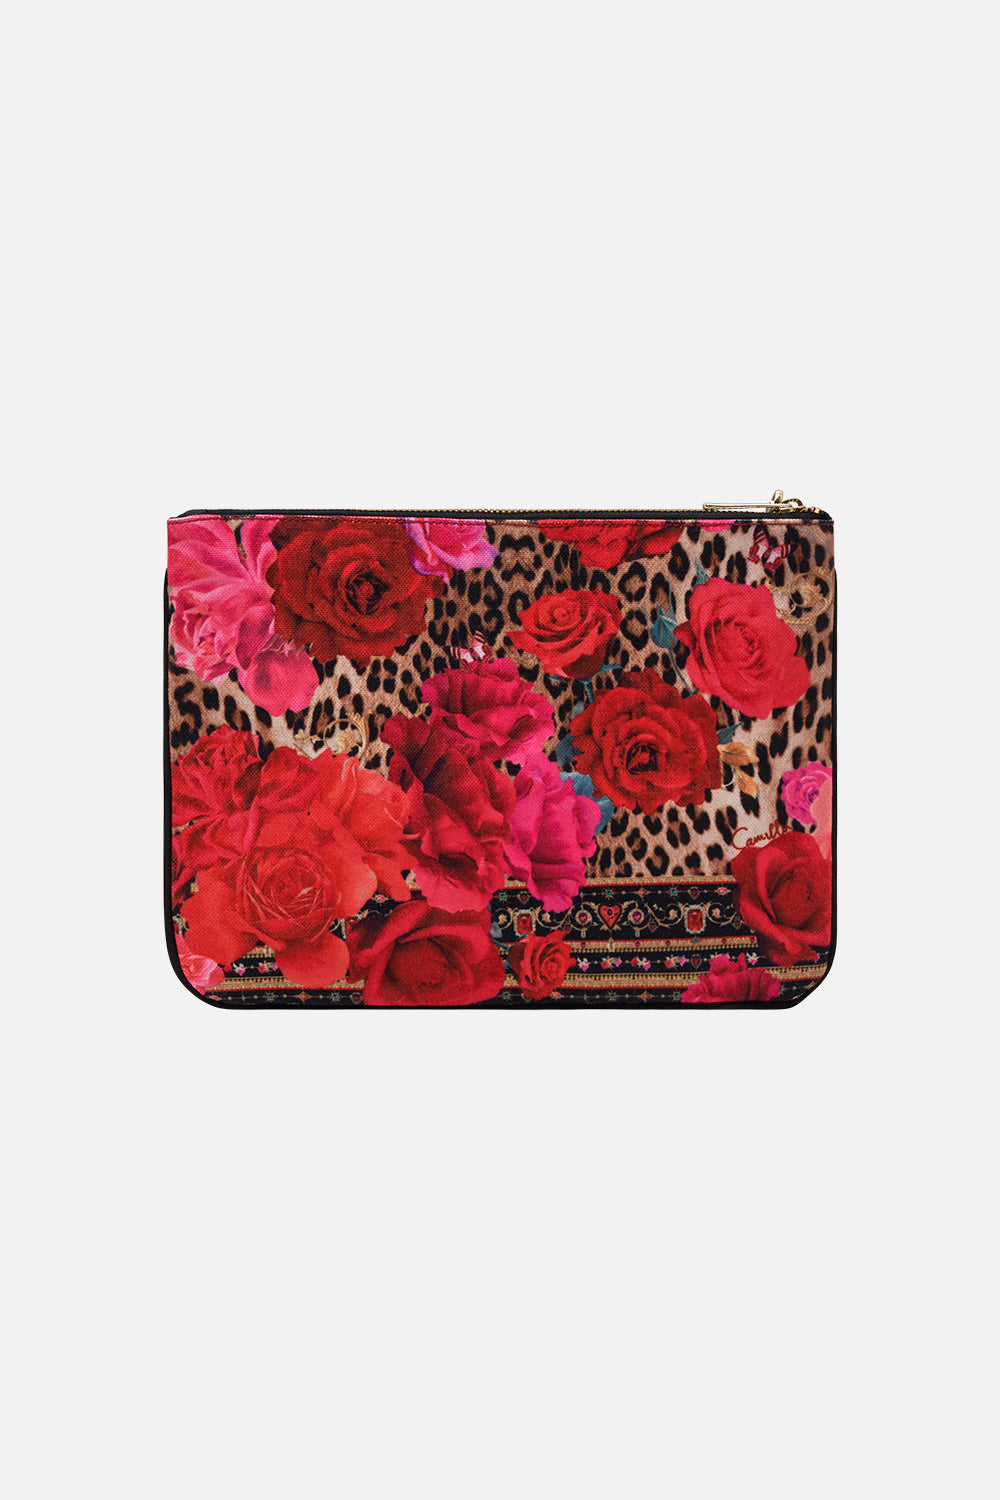 Product view of CAMILLA clutch in Heart Like A Wildflower print 